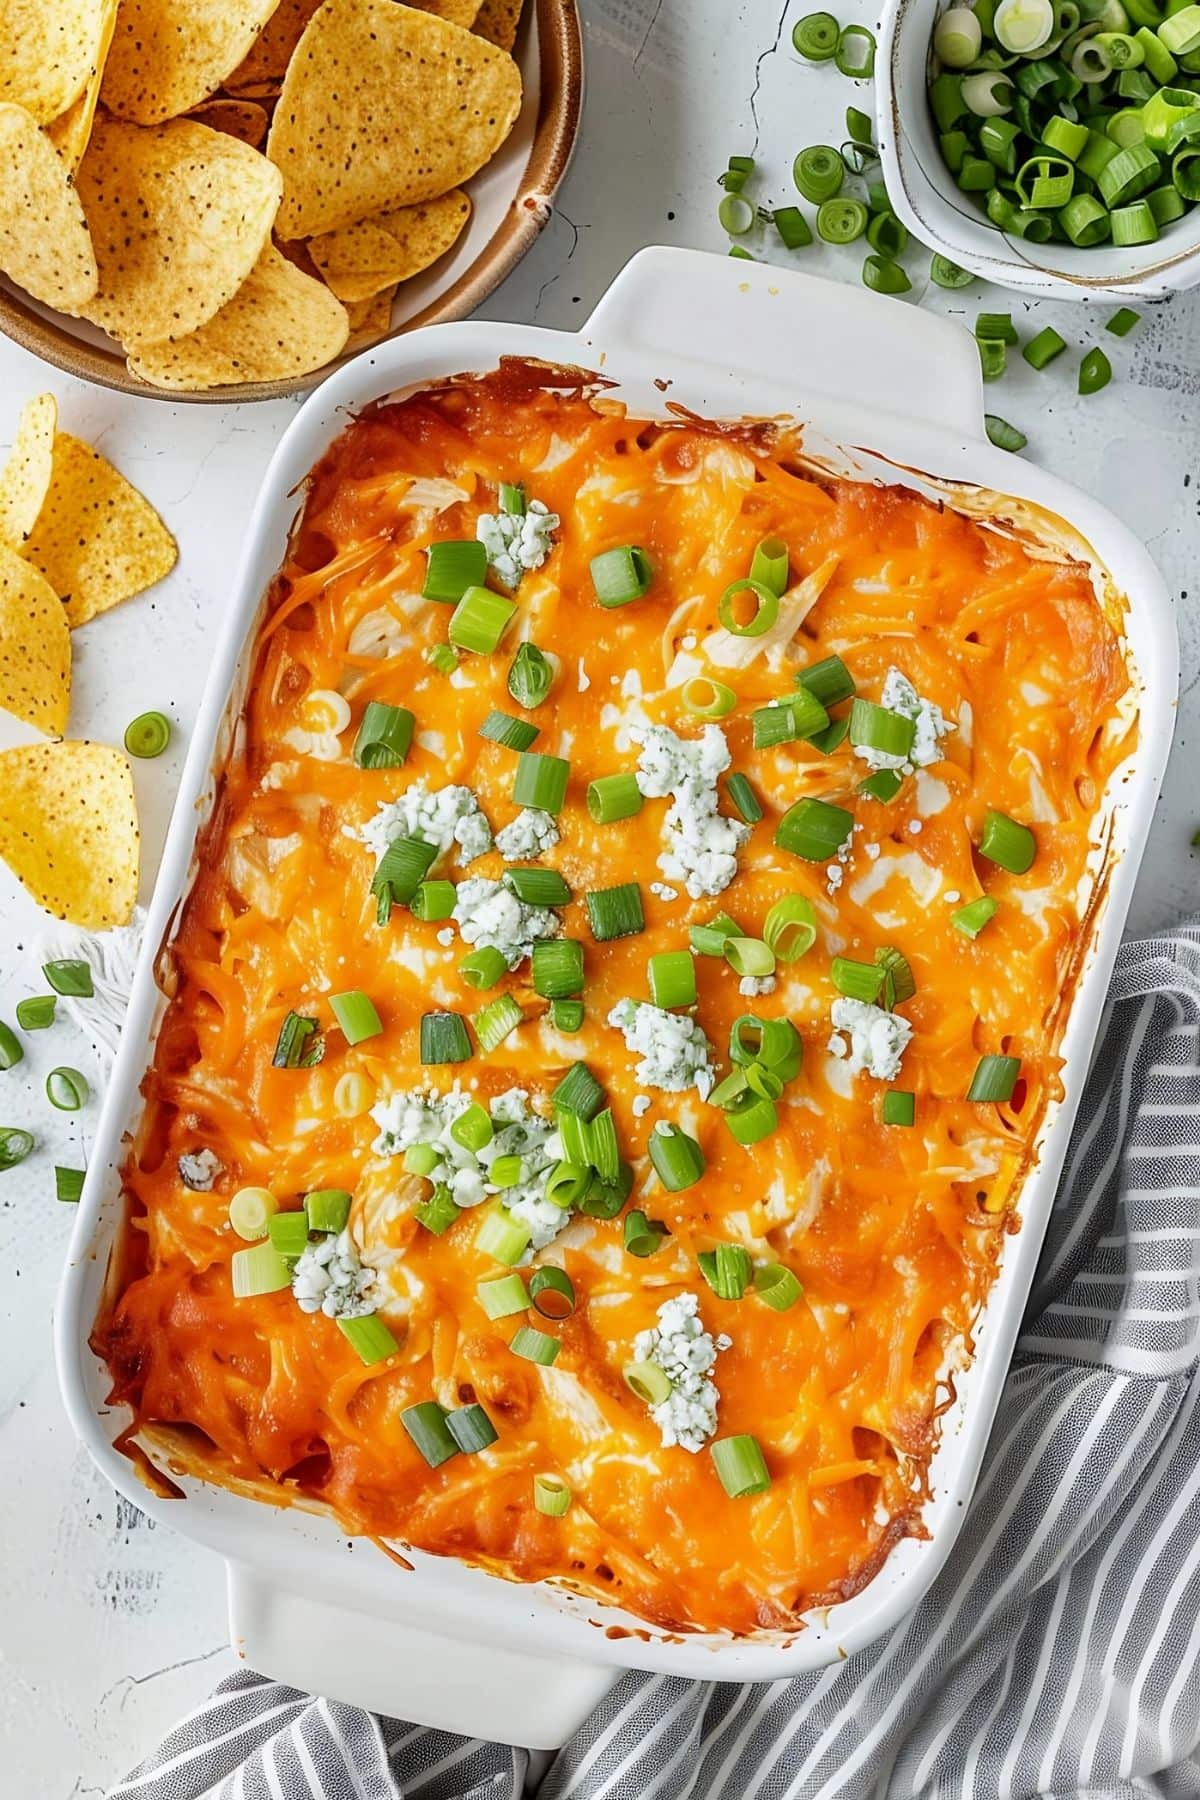 Top View of Frank's Buffalo Chicken Dip Covered with Cheese, Bleu Cheese, and Green Onions in a White Casserole Dish on a White Marble Table with More Green Onions in a Bowl and Tortilla Chips